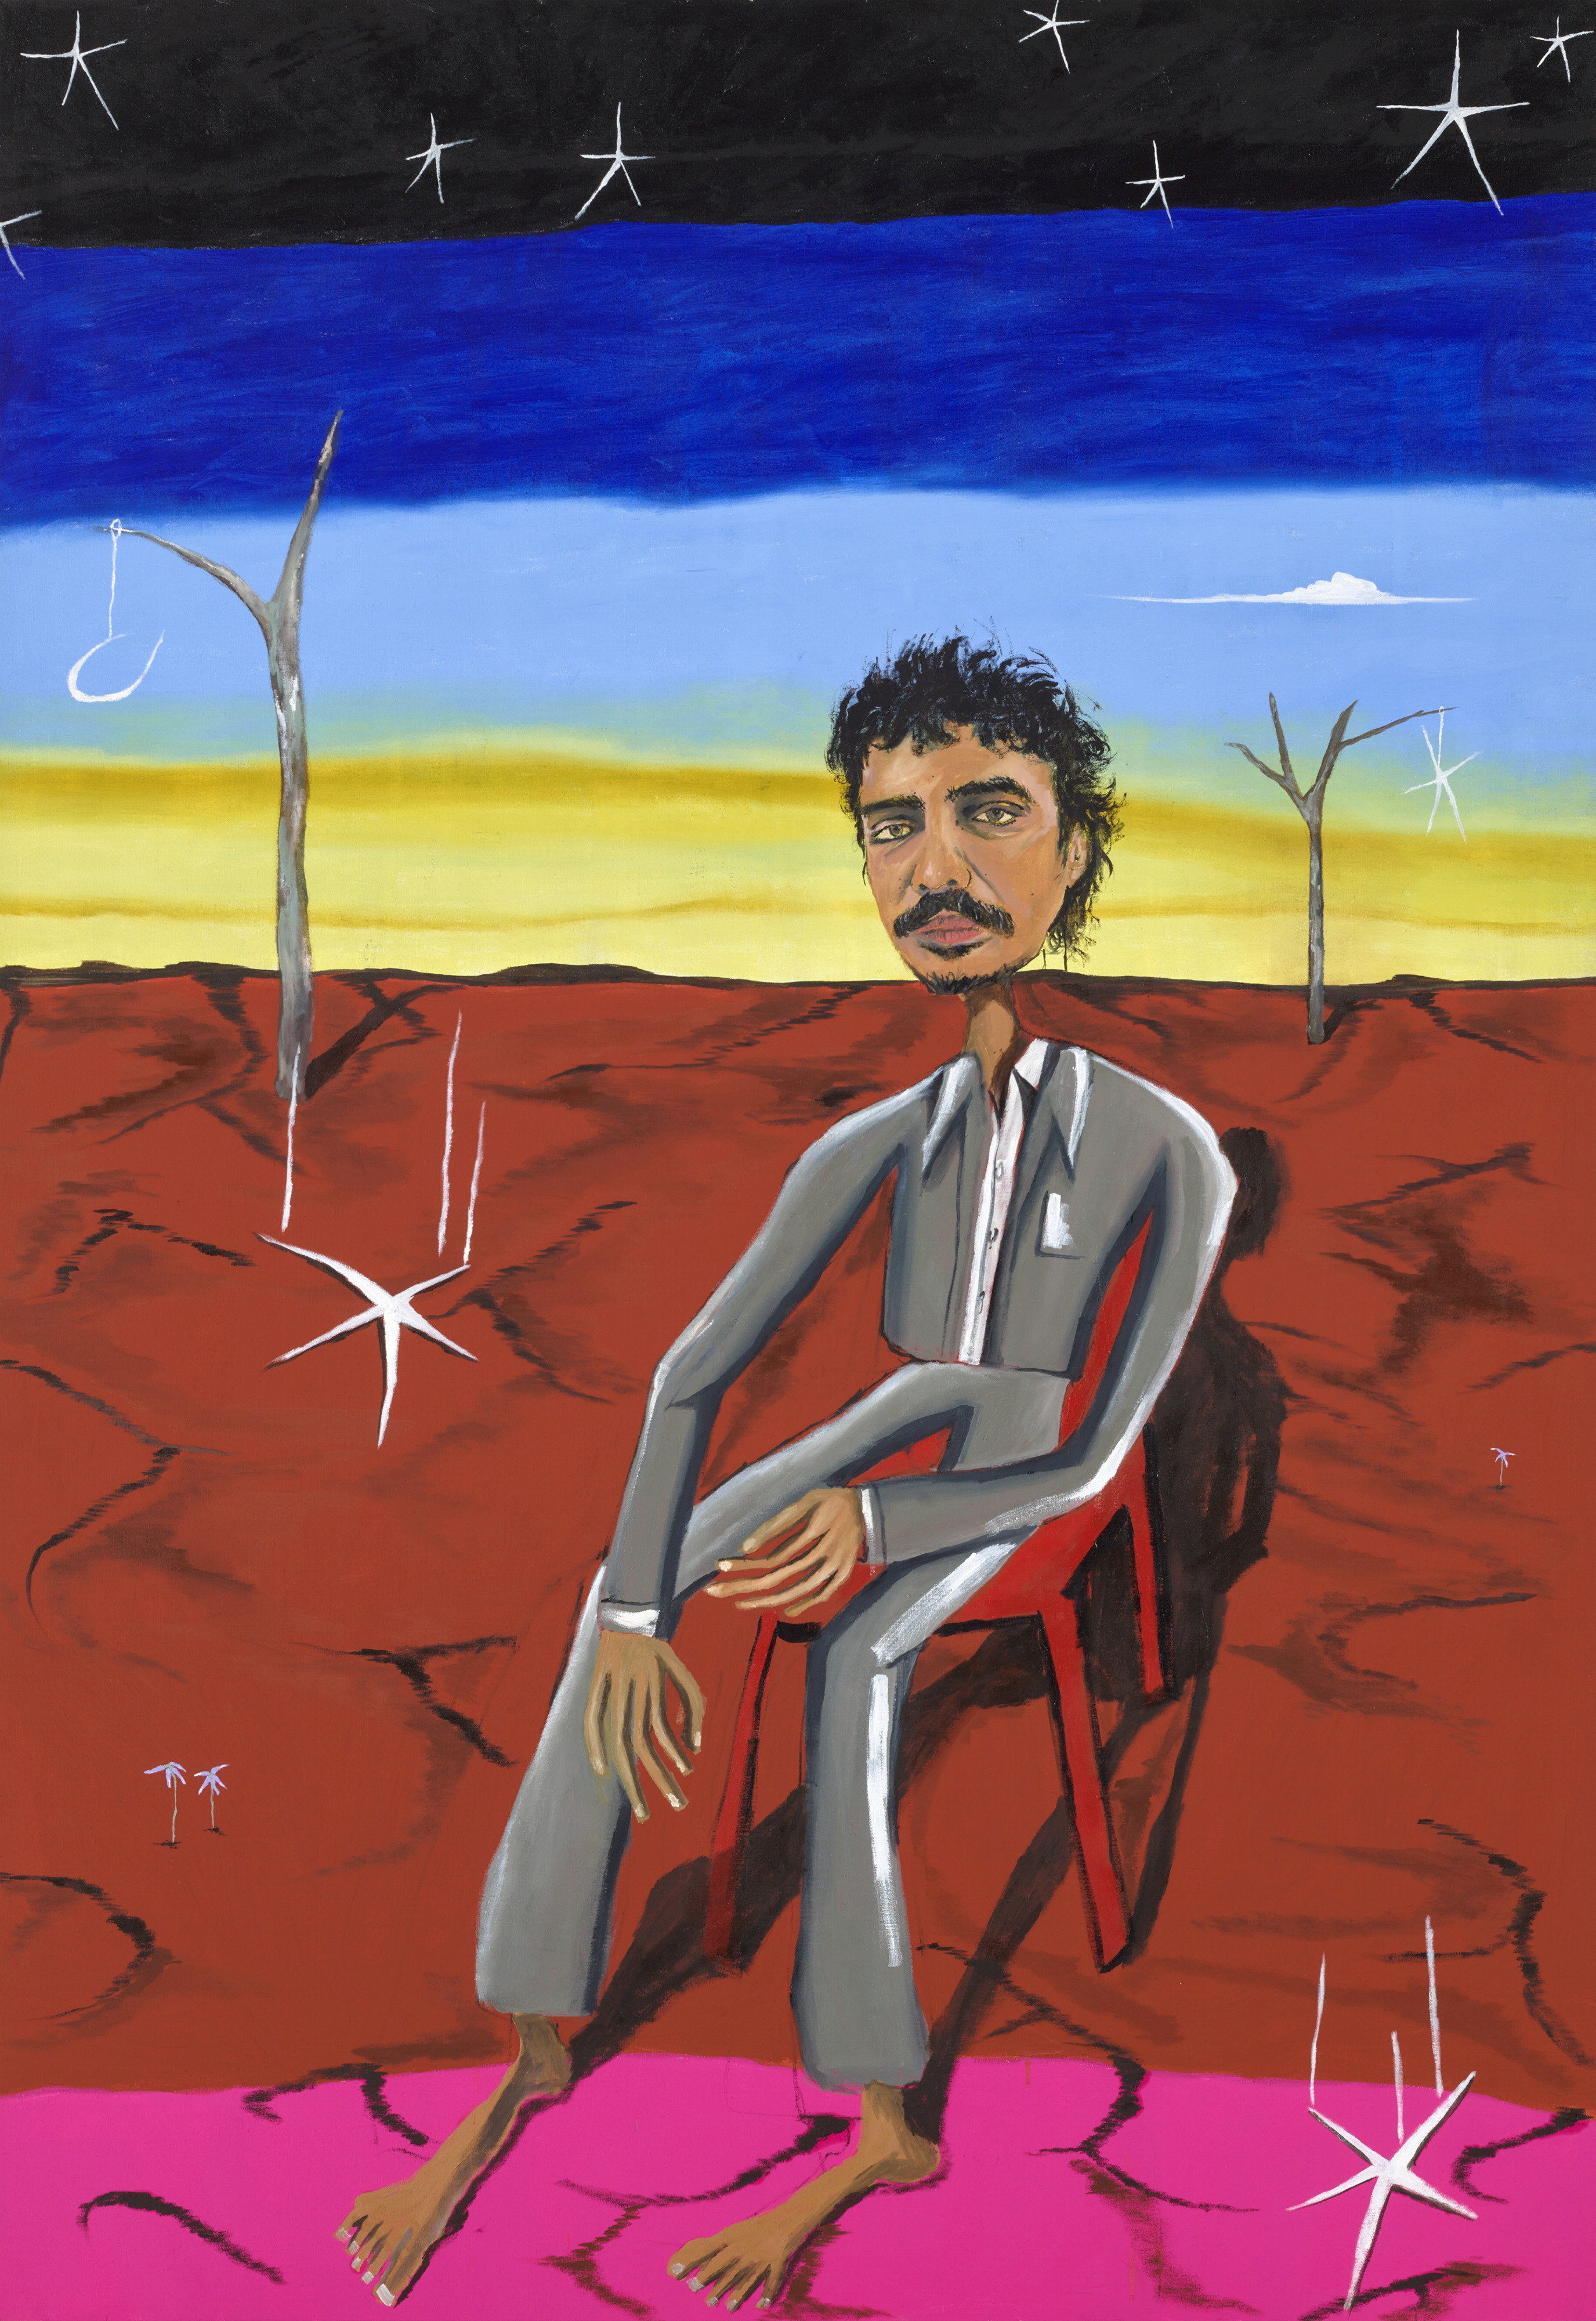 A portrait of Tony Armstrong, an Indigenous man with dark curly hair and a moustache sitting in outback Australia.